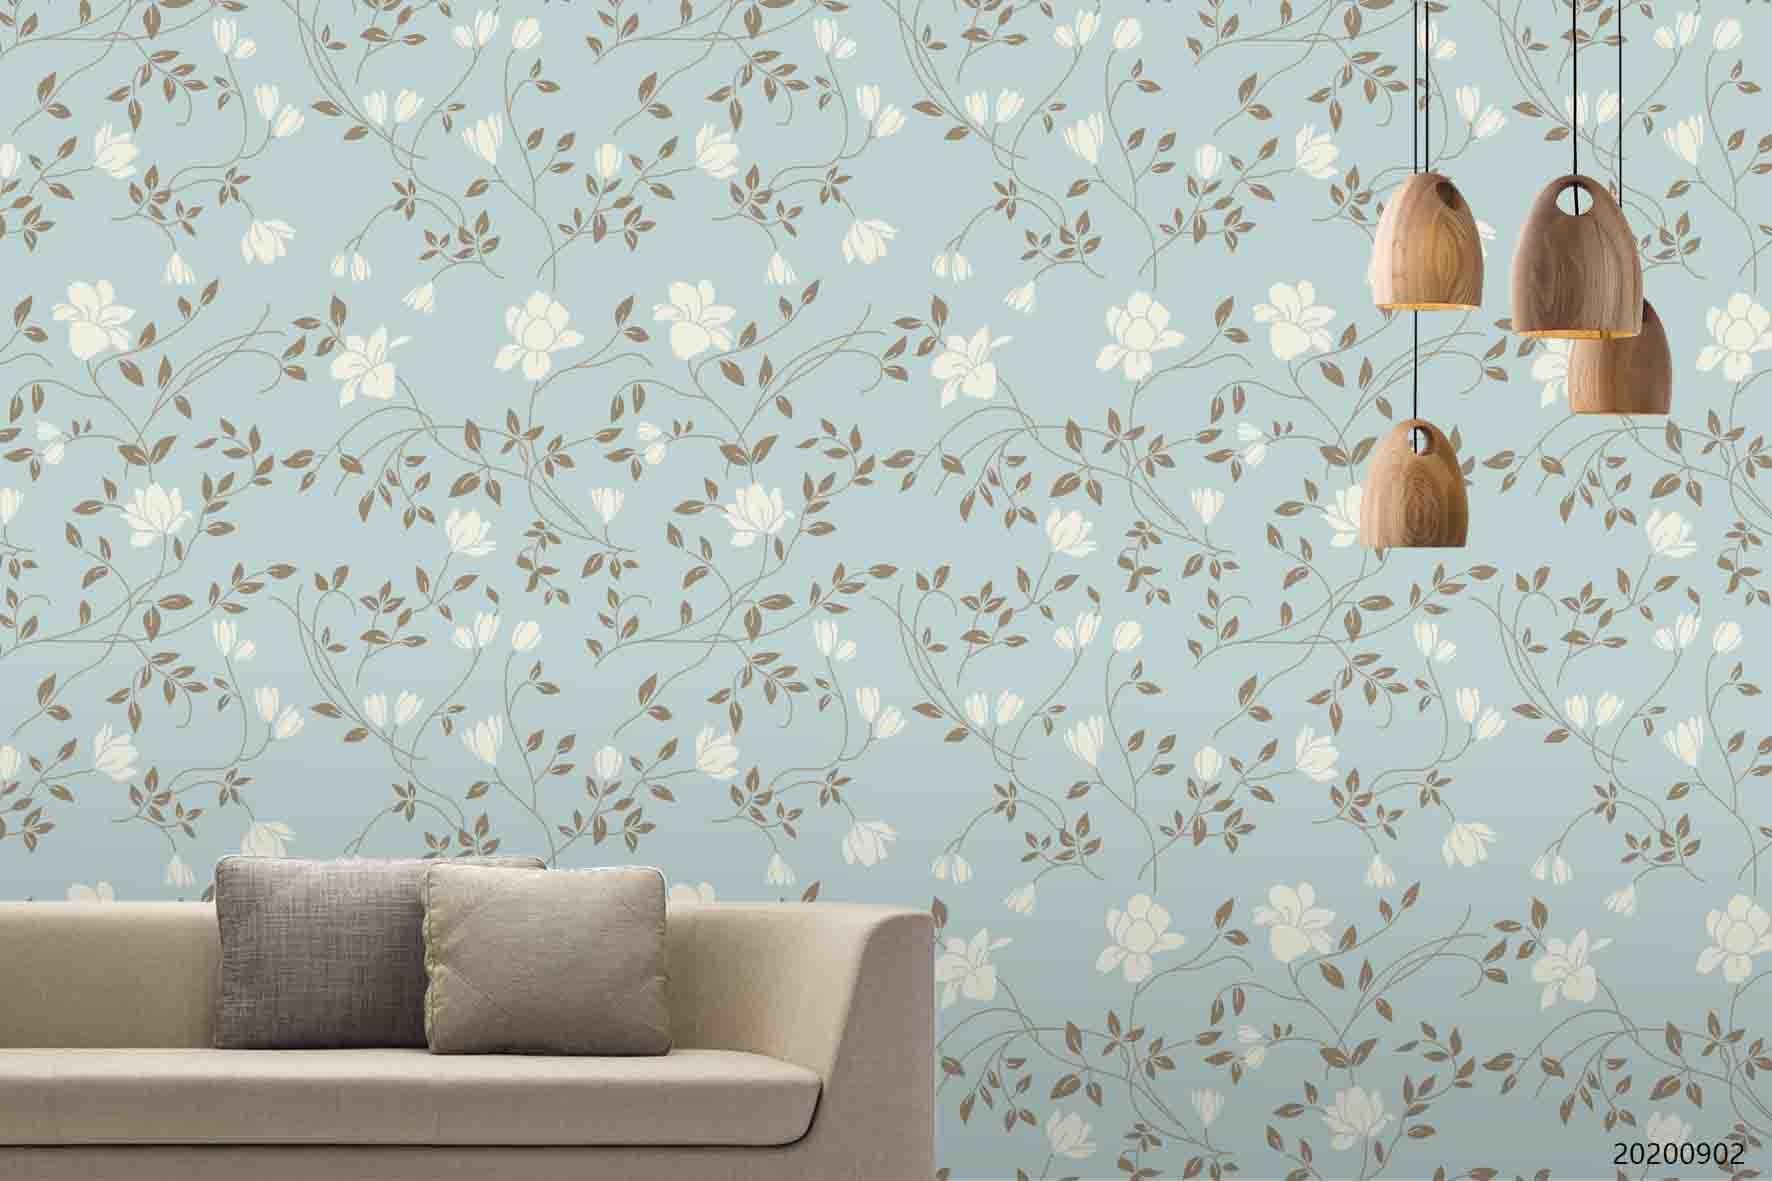 3D Hand Sketching White Floral Plant Wall Mural Wallpaper LXL 1243- Jess Art Decoration